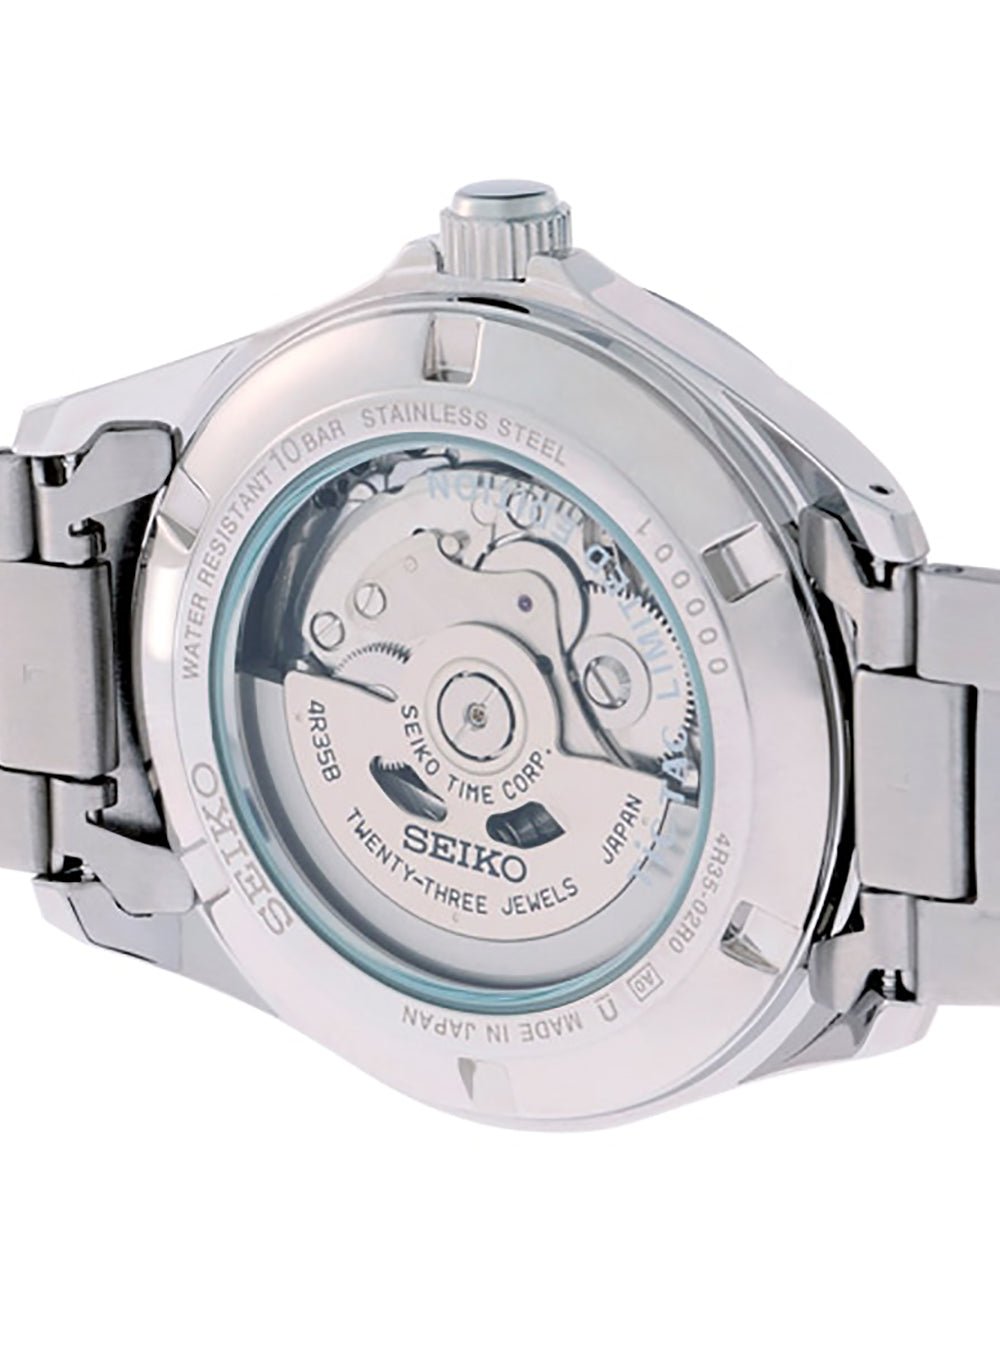 SEIKO × TiCTAC 35TH ANNIVERSARY LIMITED EDITION SZSB028 MADE IN JAPAN JDMjapan-select2700002273768WRISTWATCHSEIKO